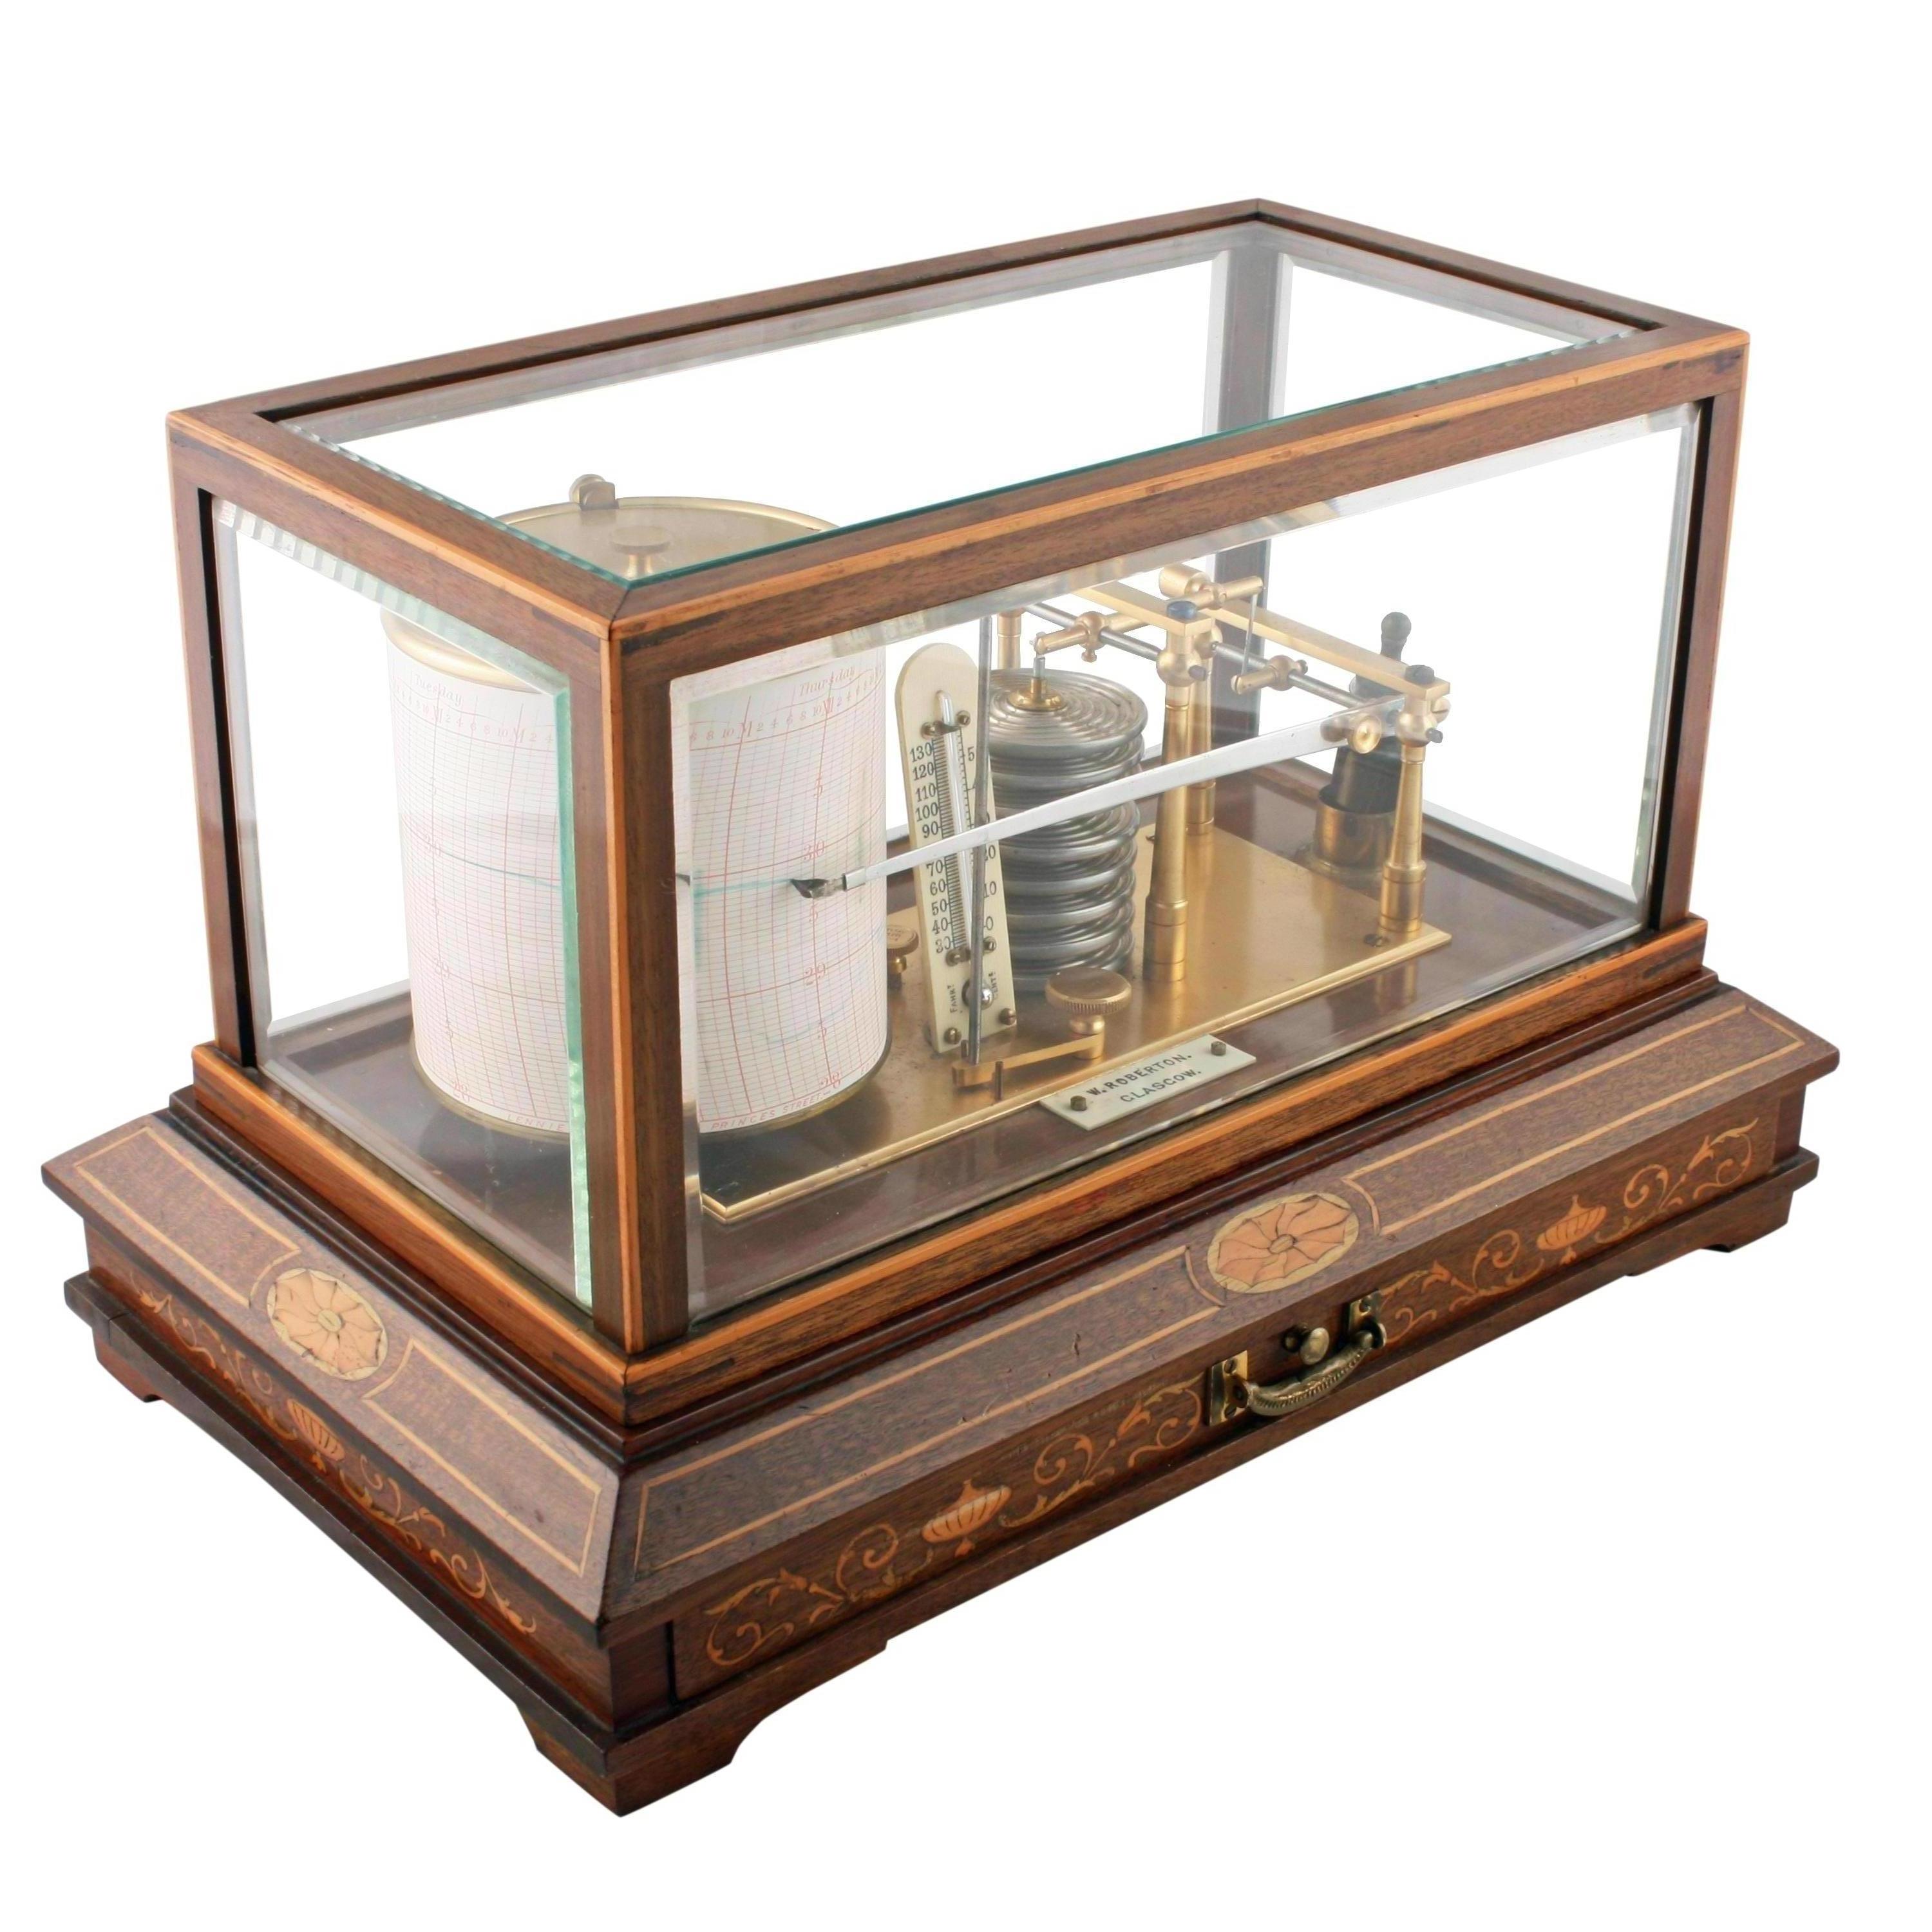 Edwardian Inlaid Mahogany Barograph


An early 20th century Edwardian barograph and thermometer in an inlaid mahogany case.

The barograph has a clock work revolving drum which holds a recording chart on which the fluctuations in barometric